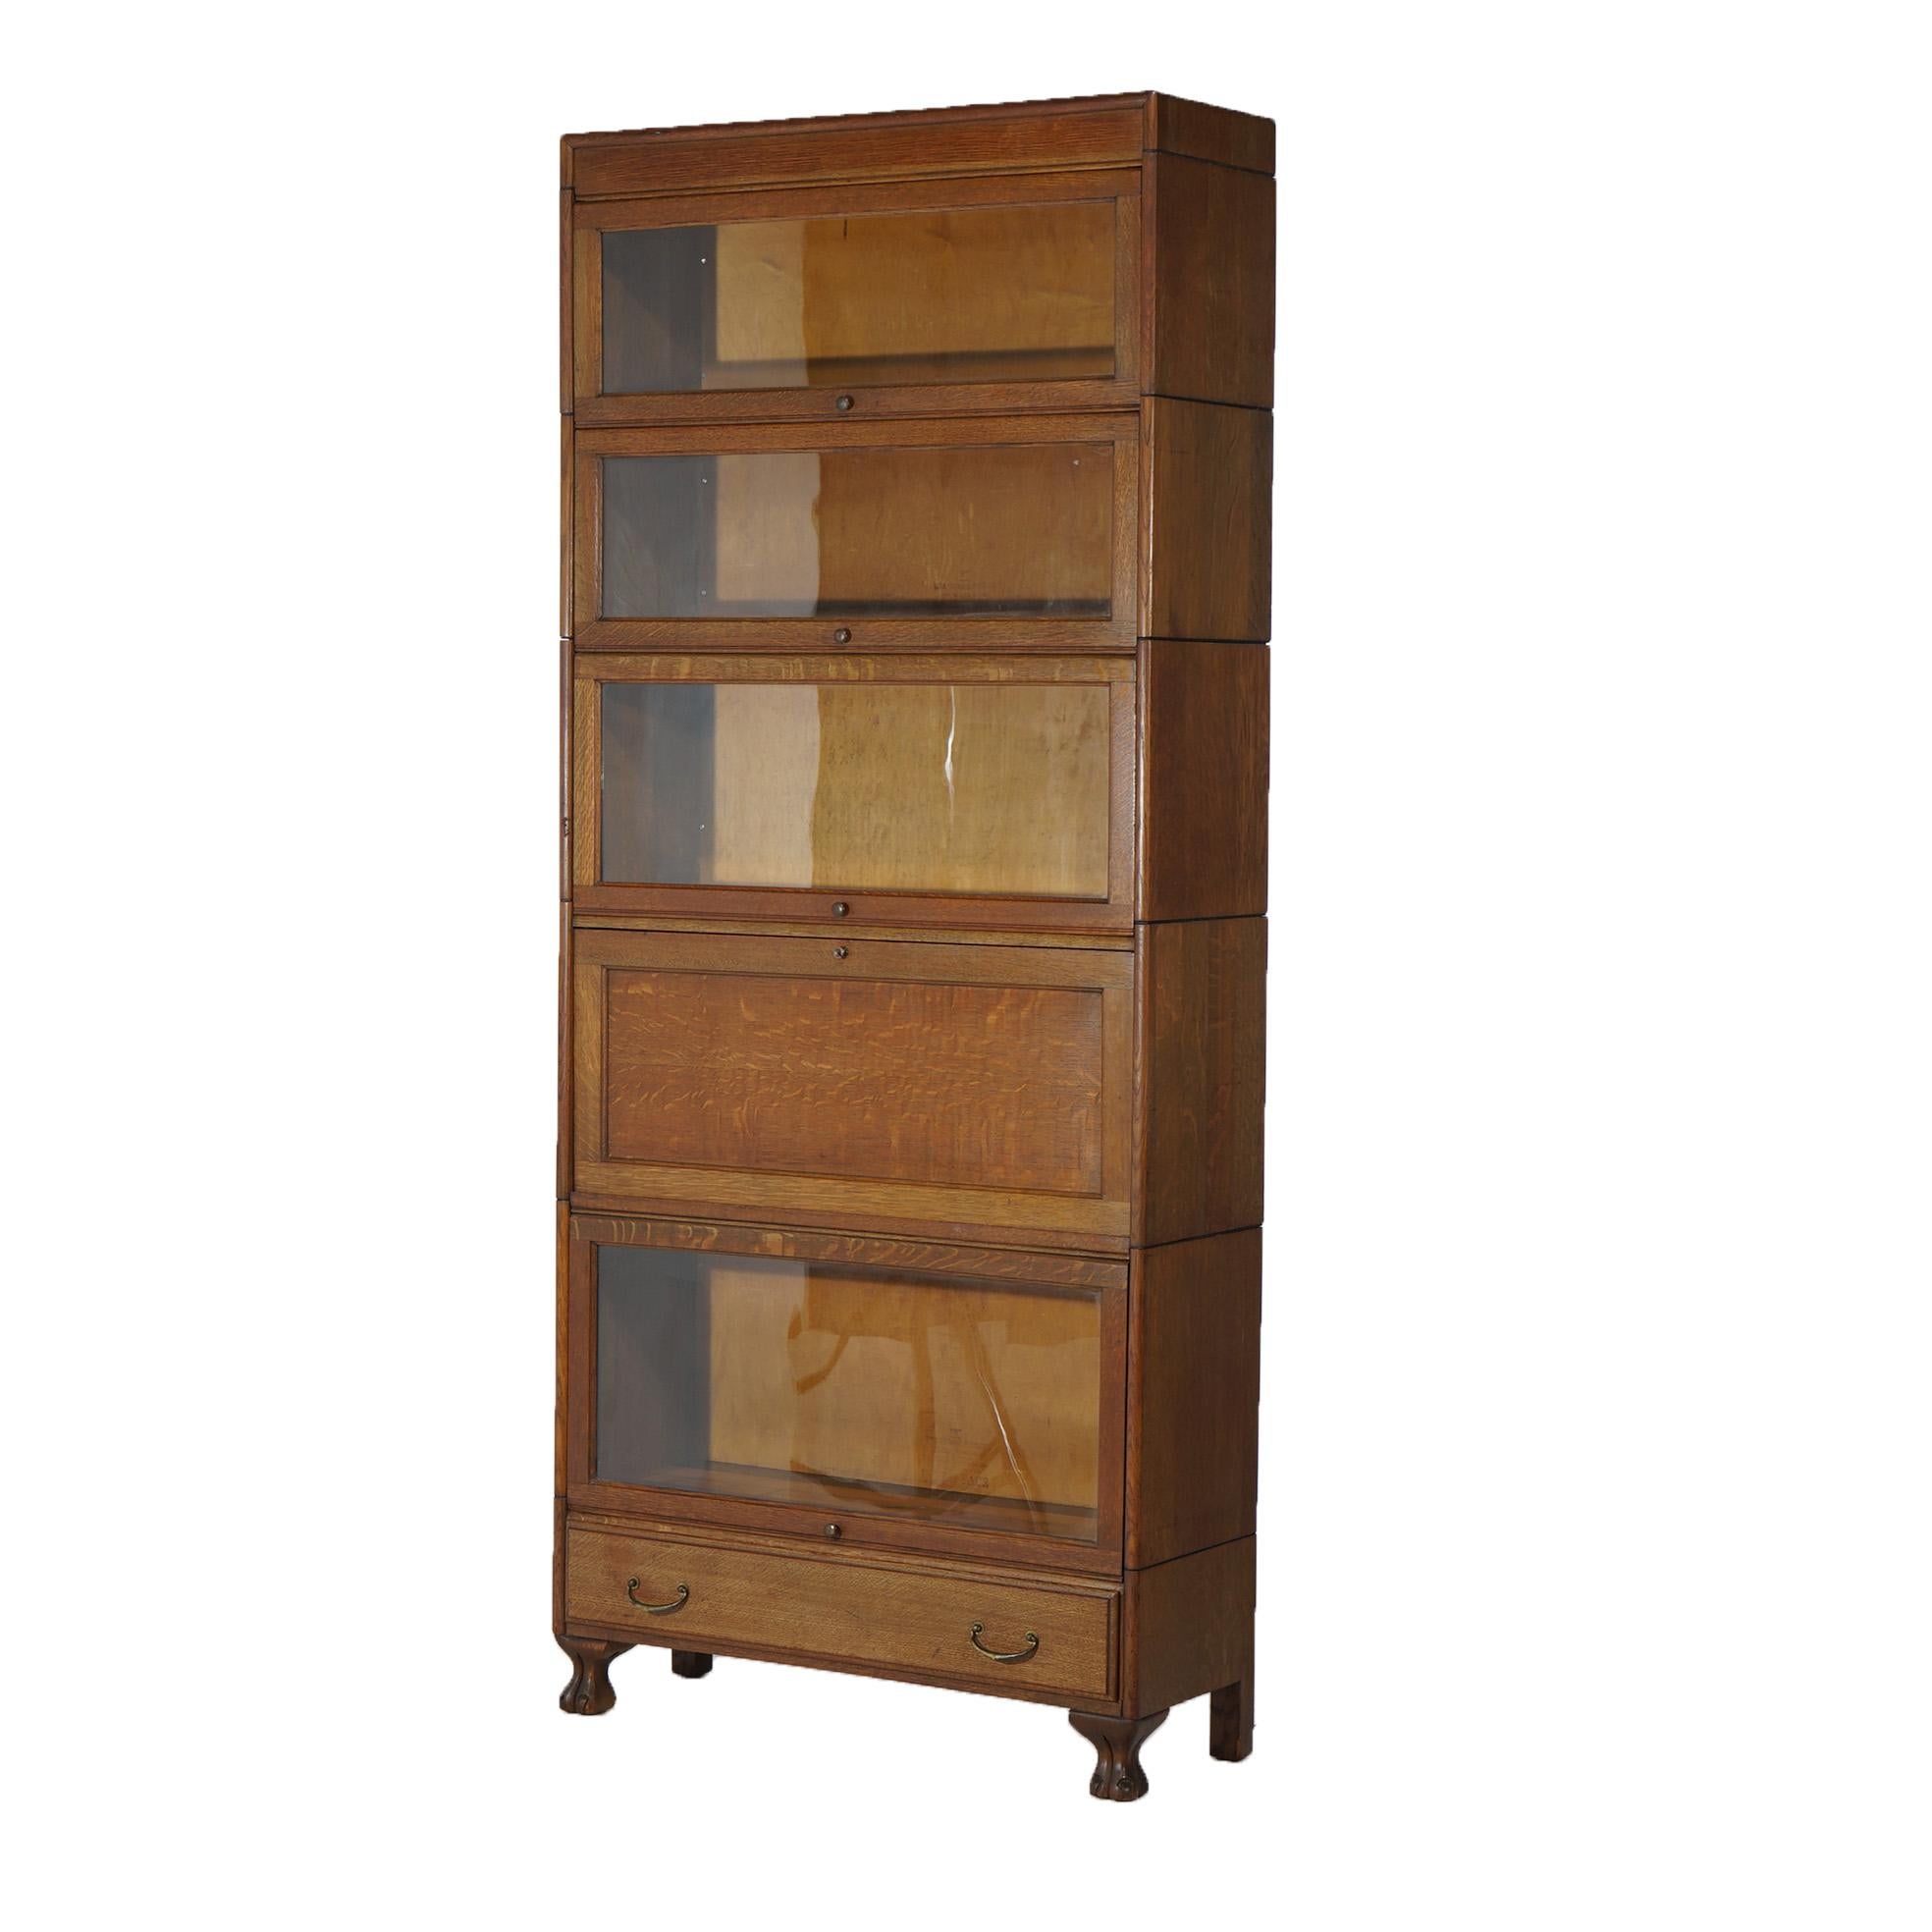 ***Ask About Reduced In-House Shipping Rates - Reliable Service & Fully Insured***
An antique Arts and Crafts barrister bookcase by Gunn offers oak construction with four stacks having pullout glass doors and a single stack having a drop down desk